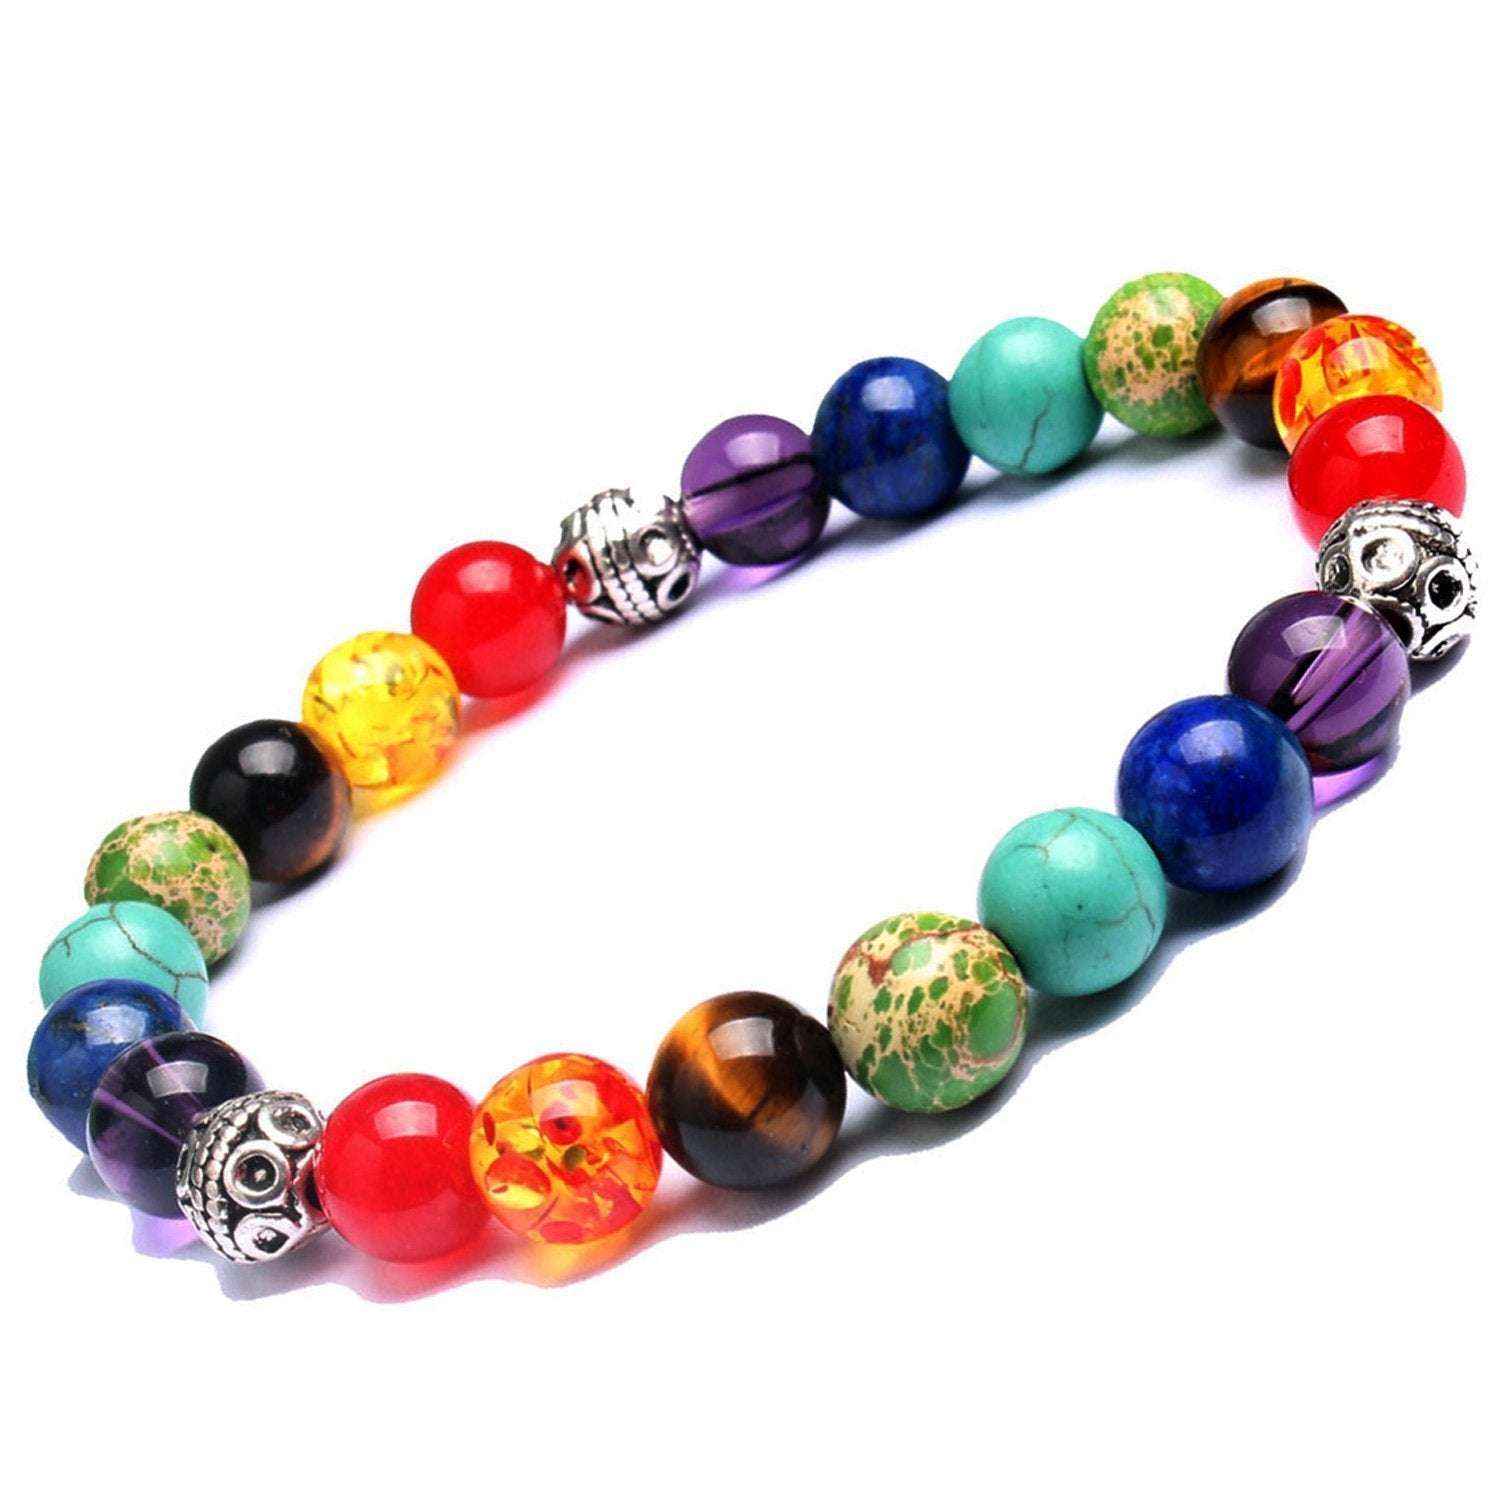 7 Chakra's Healing Bracelet (For Health, Wealth and Positivity) - Local to Vocal